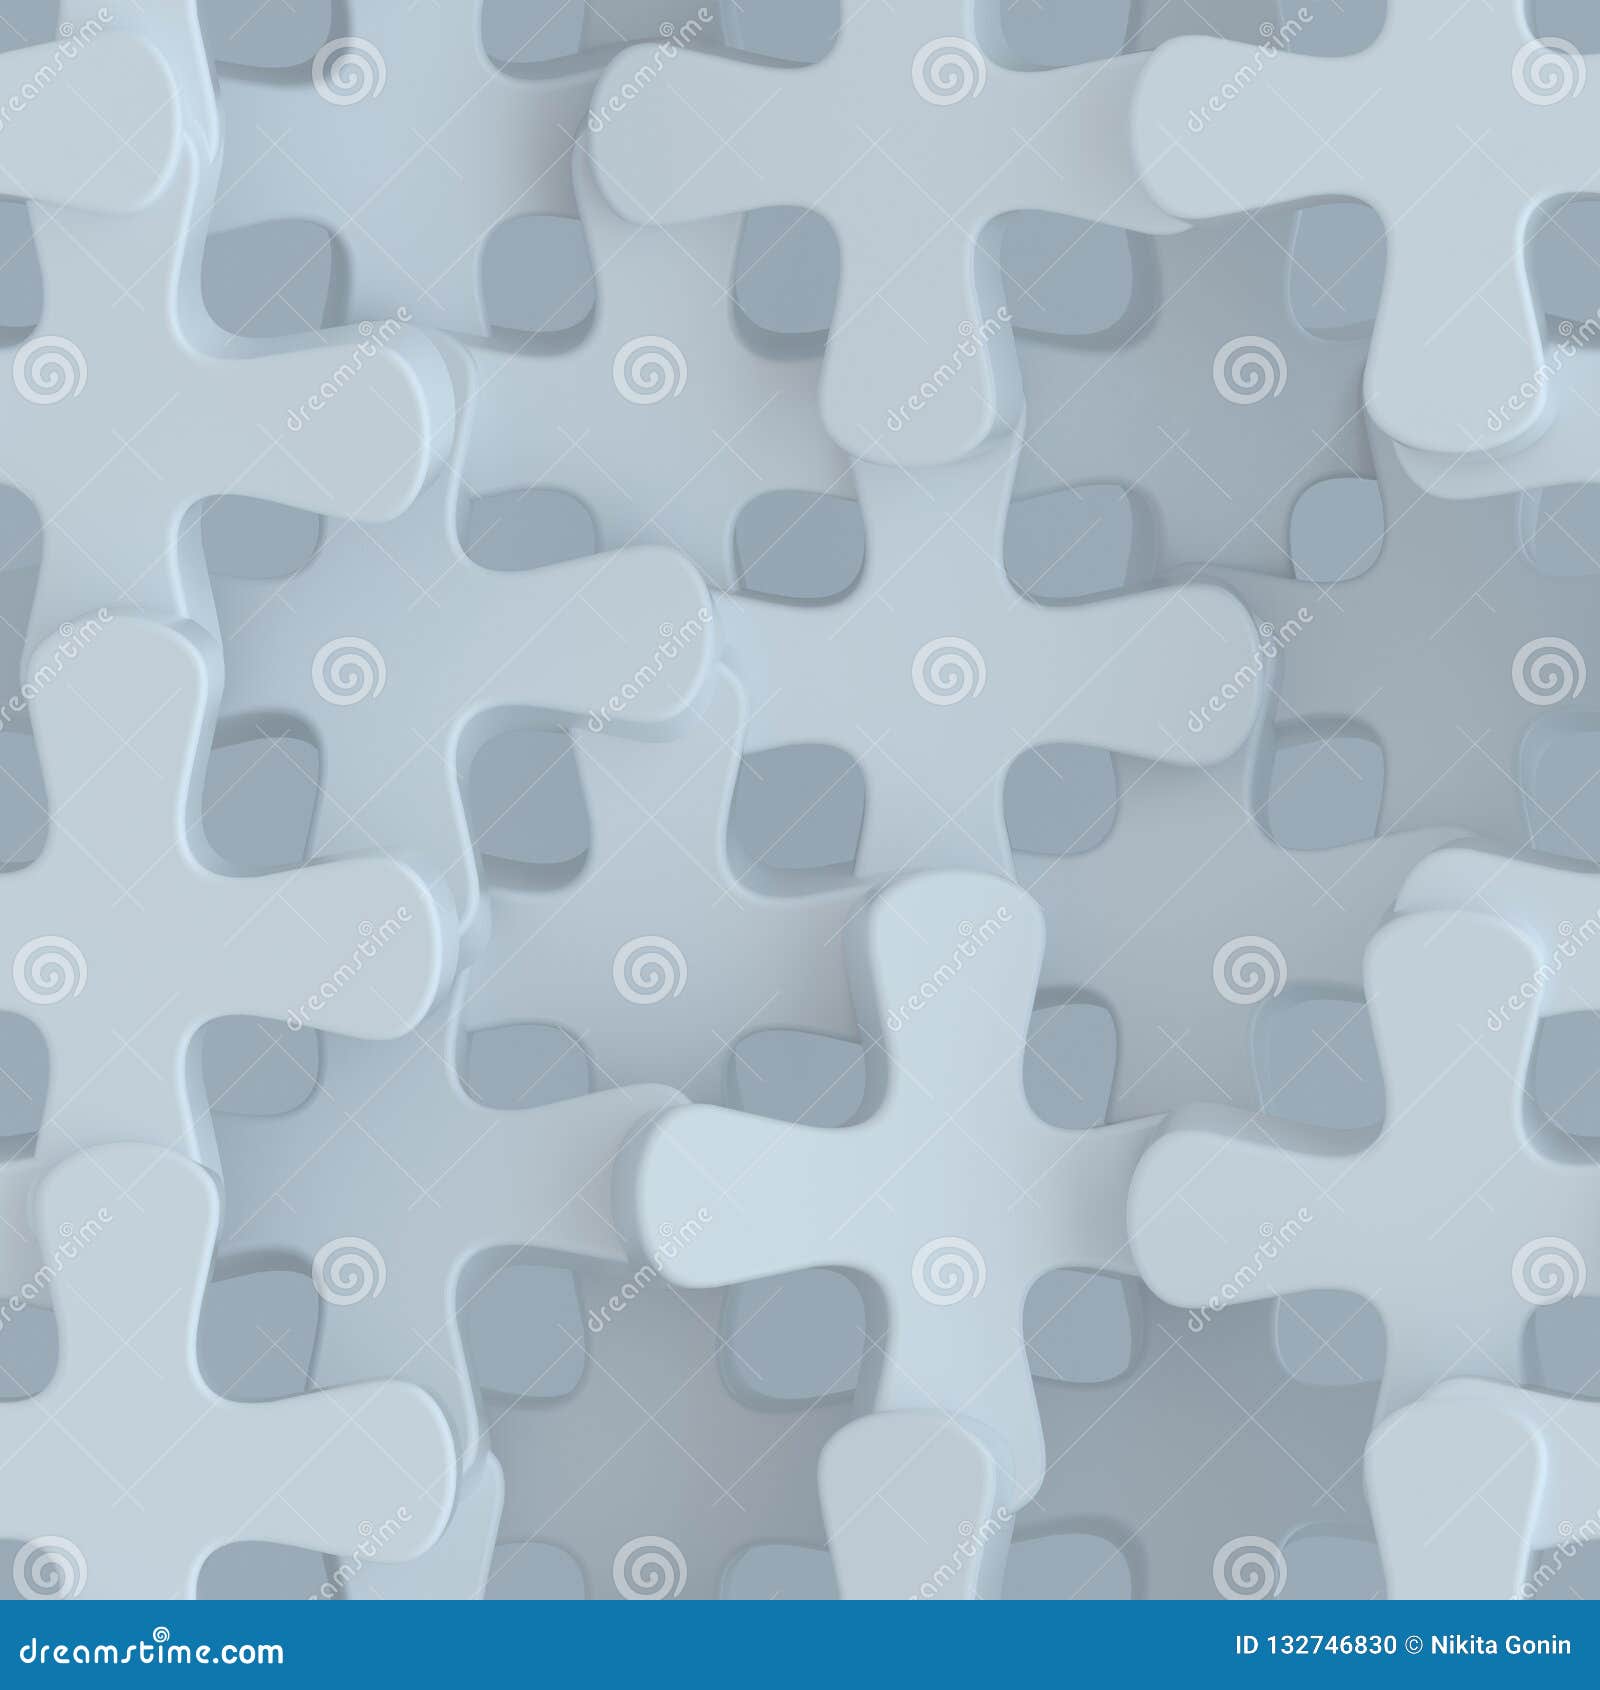 Seamless Pattern Of White Plus Signs 3d Render Stock